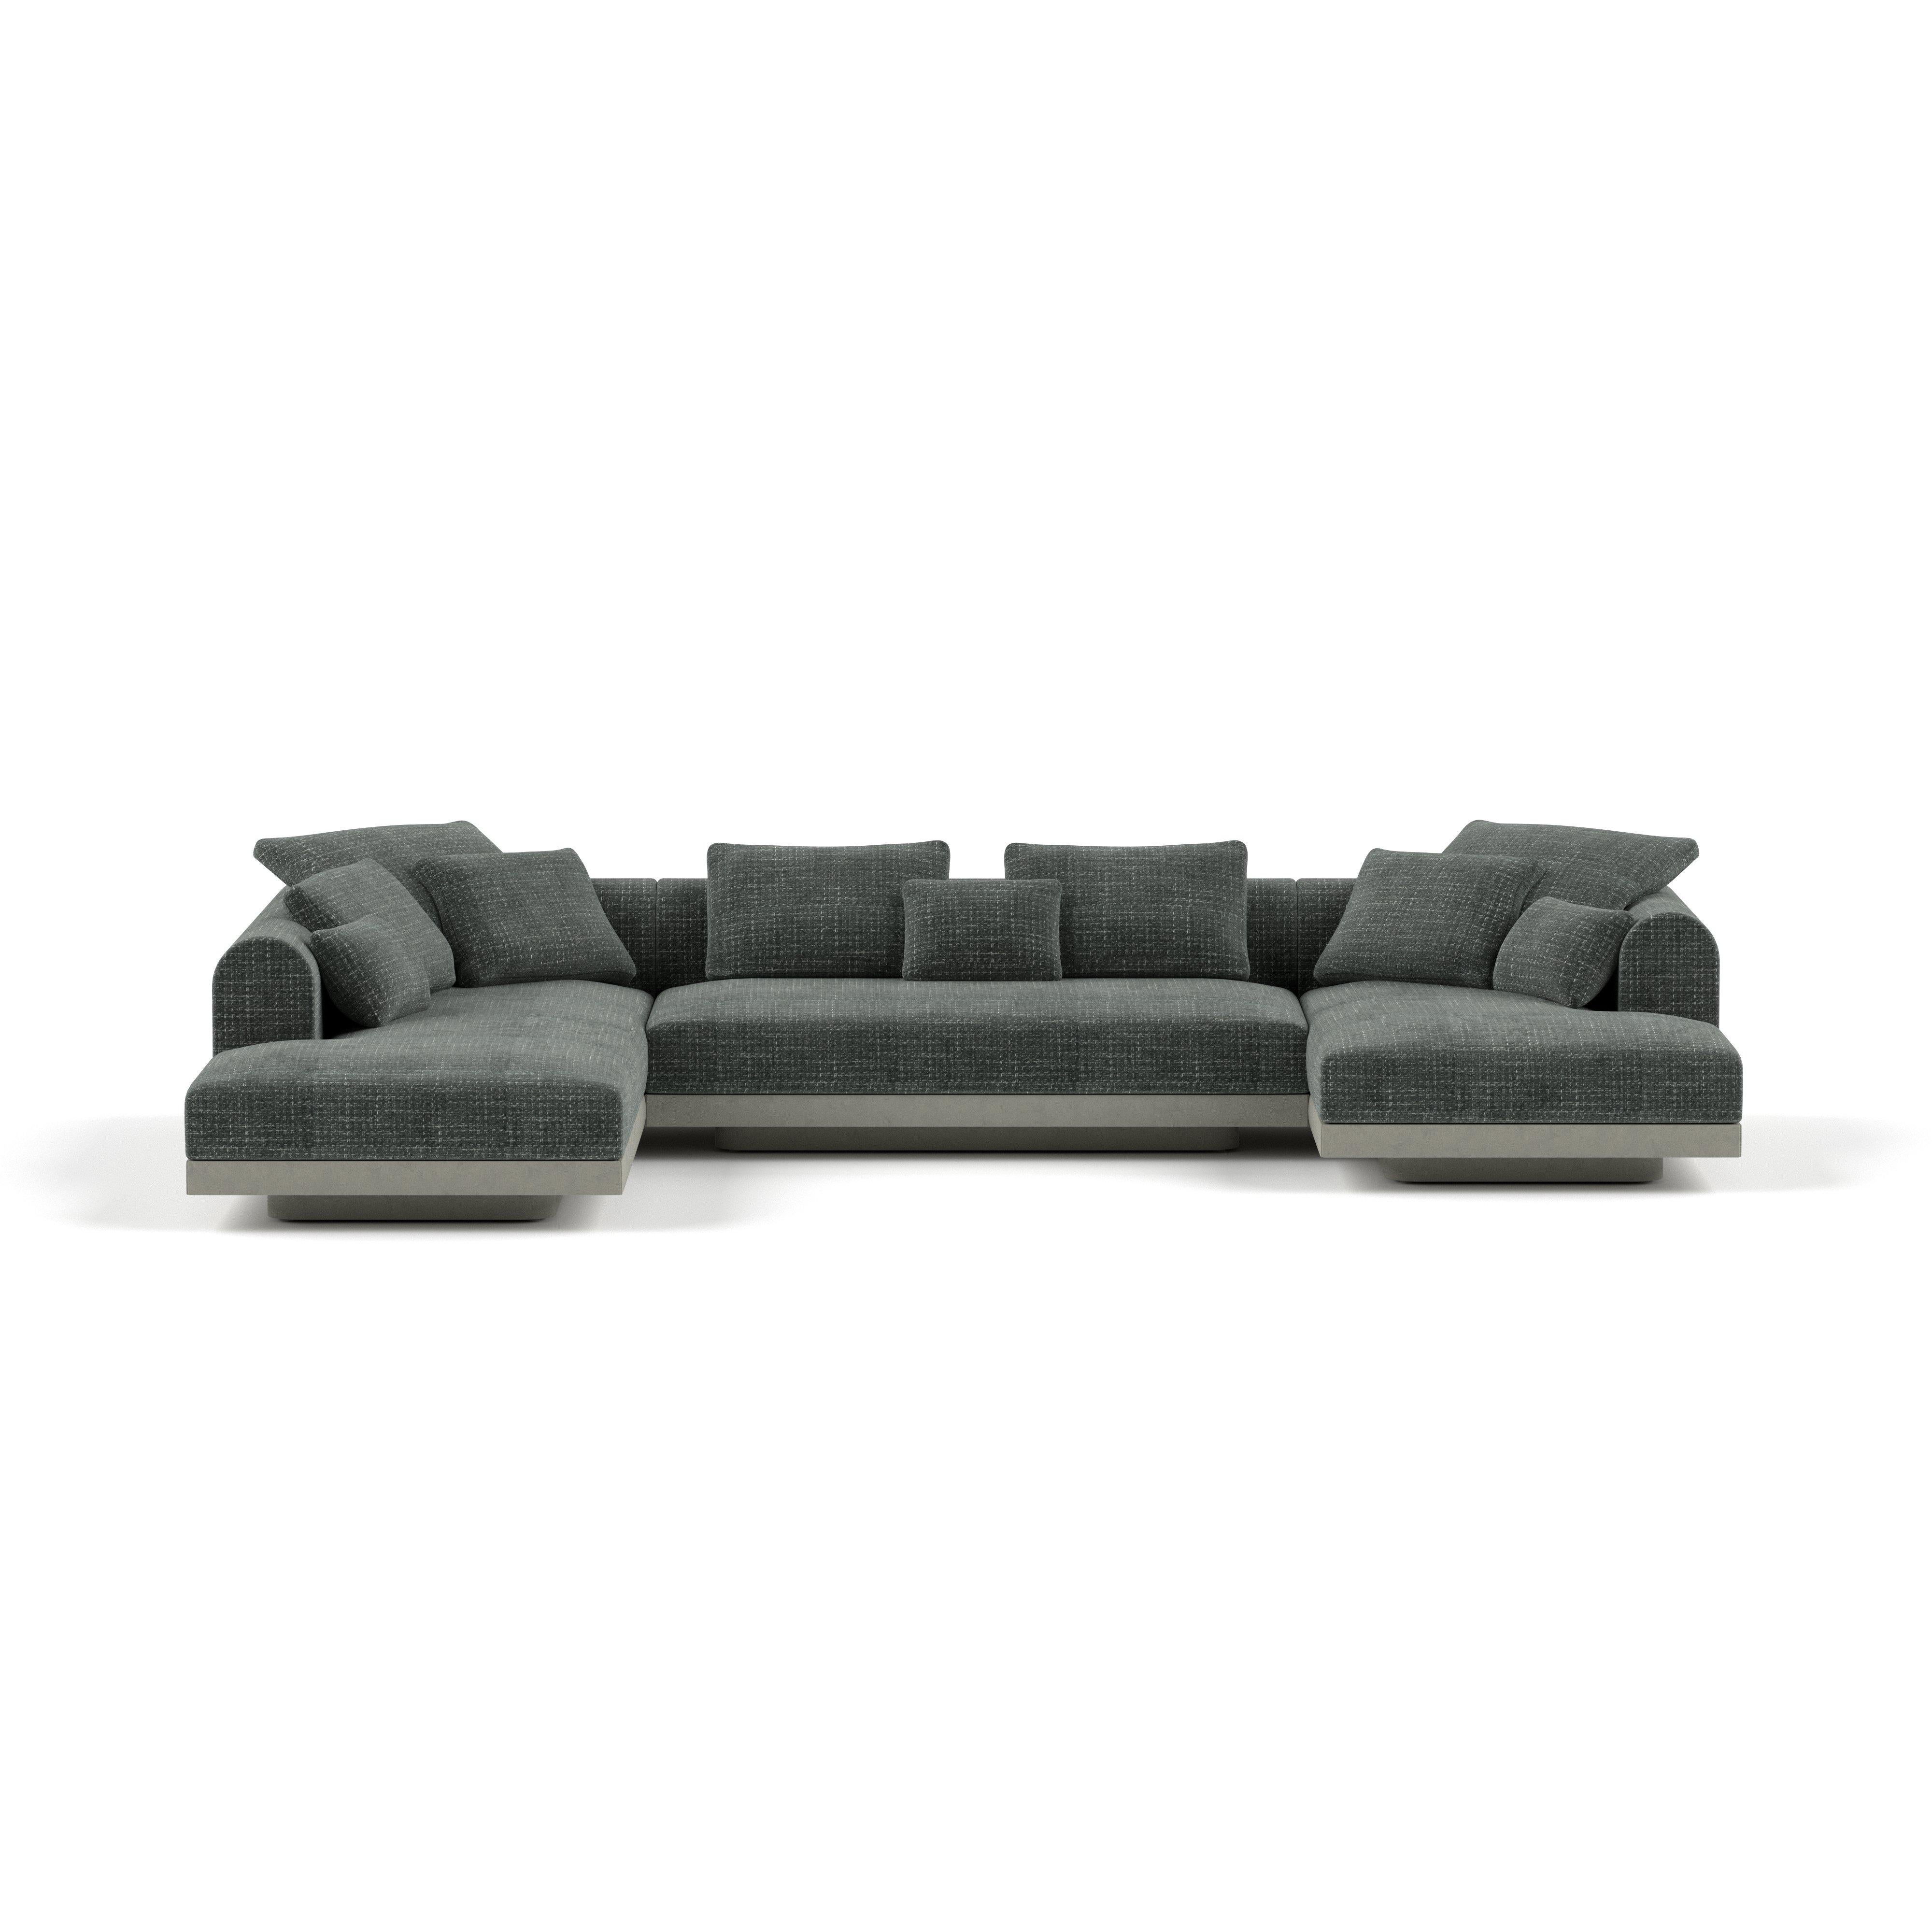 'Aqueduct' Sofa by Poiat. 
Setup 4.
Dimensions : H. 77 cm x W. 370 cm x D. 230.5 cm (SH 40 cm).

Aqueduct collection 2022 by Timo Mikkonen & Antti Rouhunkoski.

Upholstery: Chivasso - Yang 95.
Plinth: High Plinth.

The Aqueduct is a softly